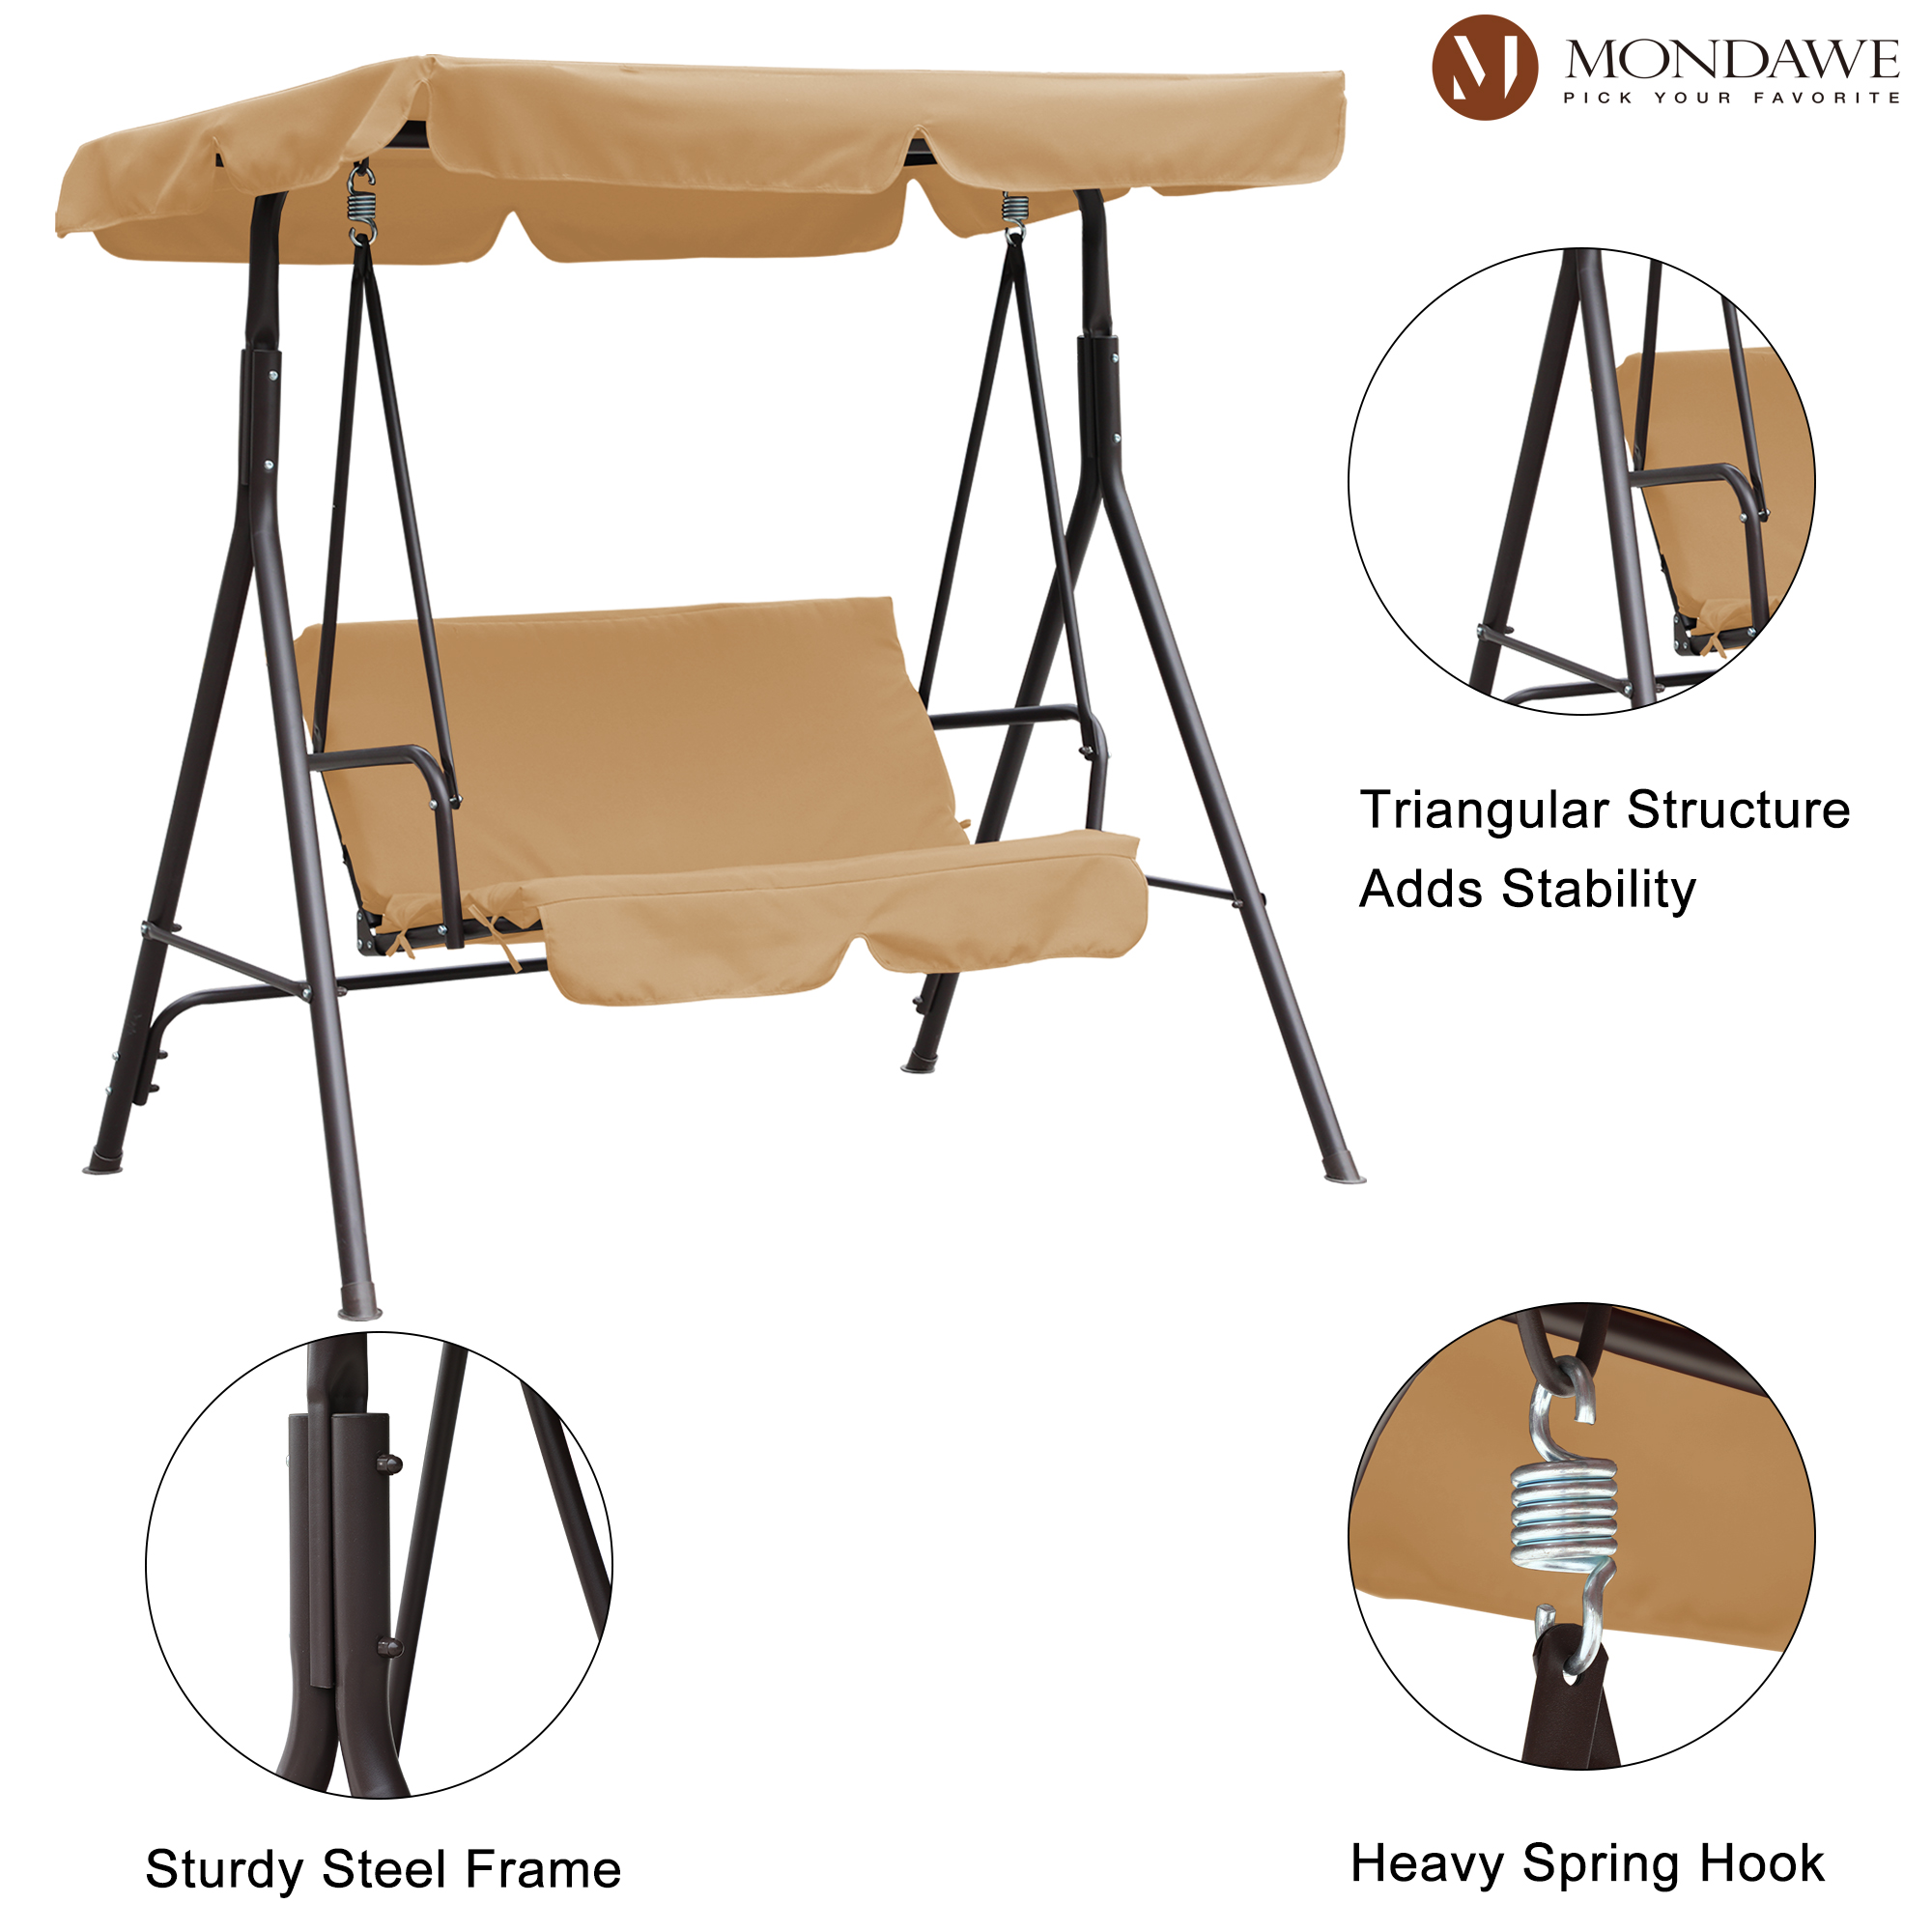 Mondawe Steel 2-Person Outdoor Canopy Swing Patio Swing Chair Porch Swing with Removable Cushion and Convertible Canopy-Mondawe